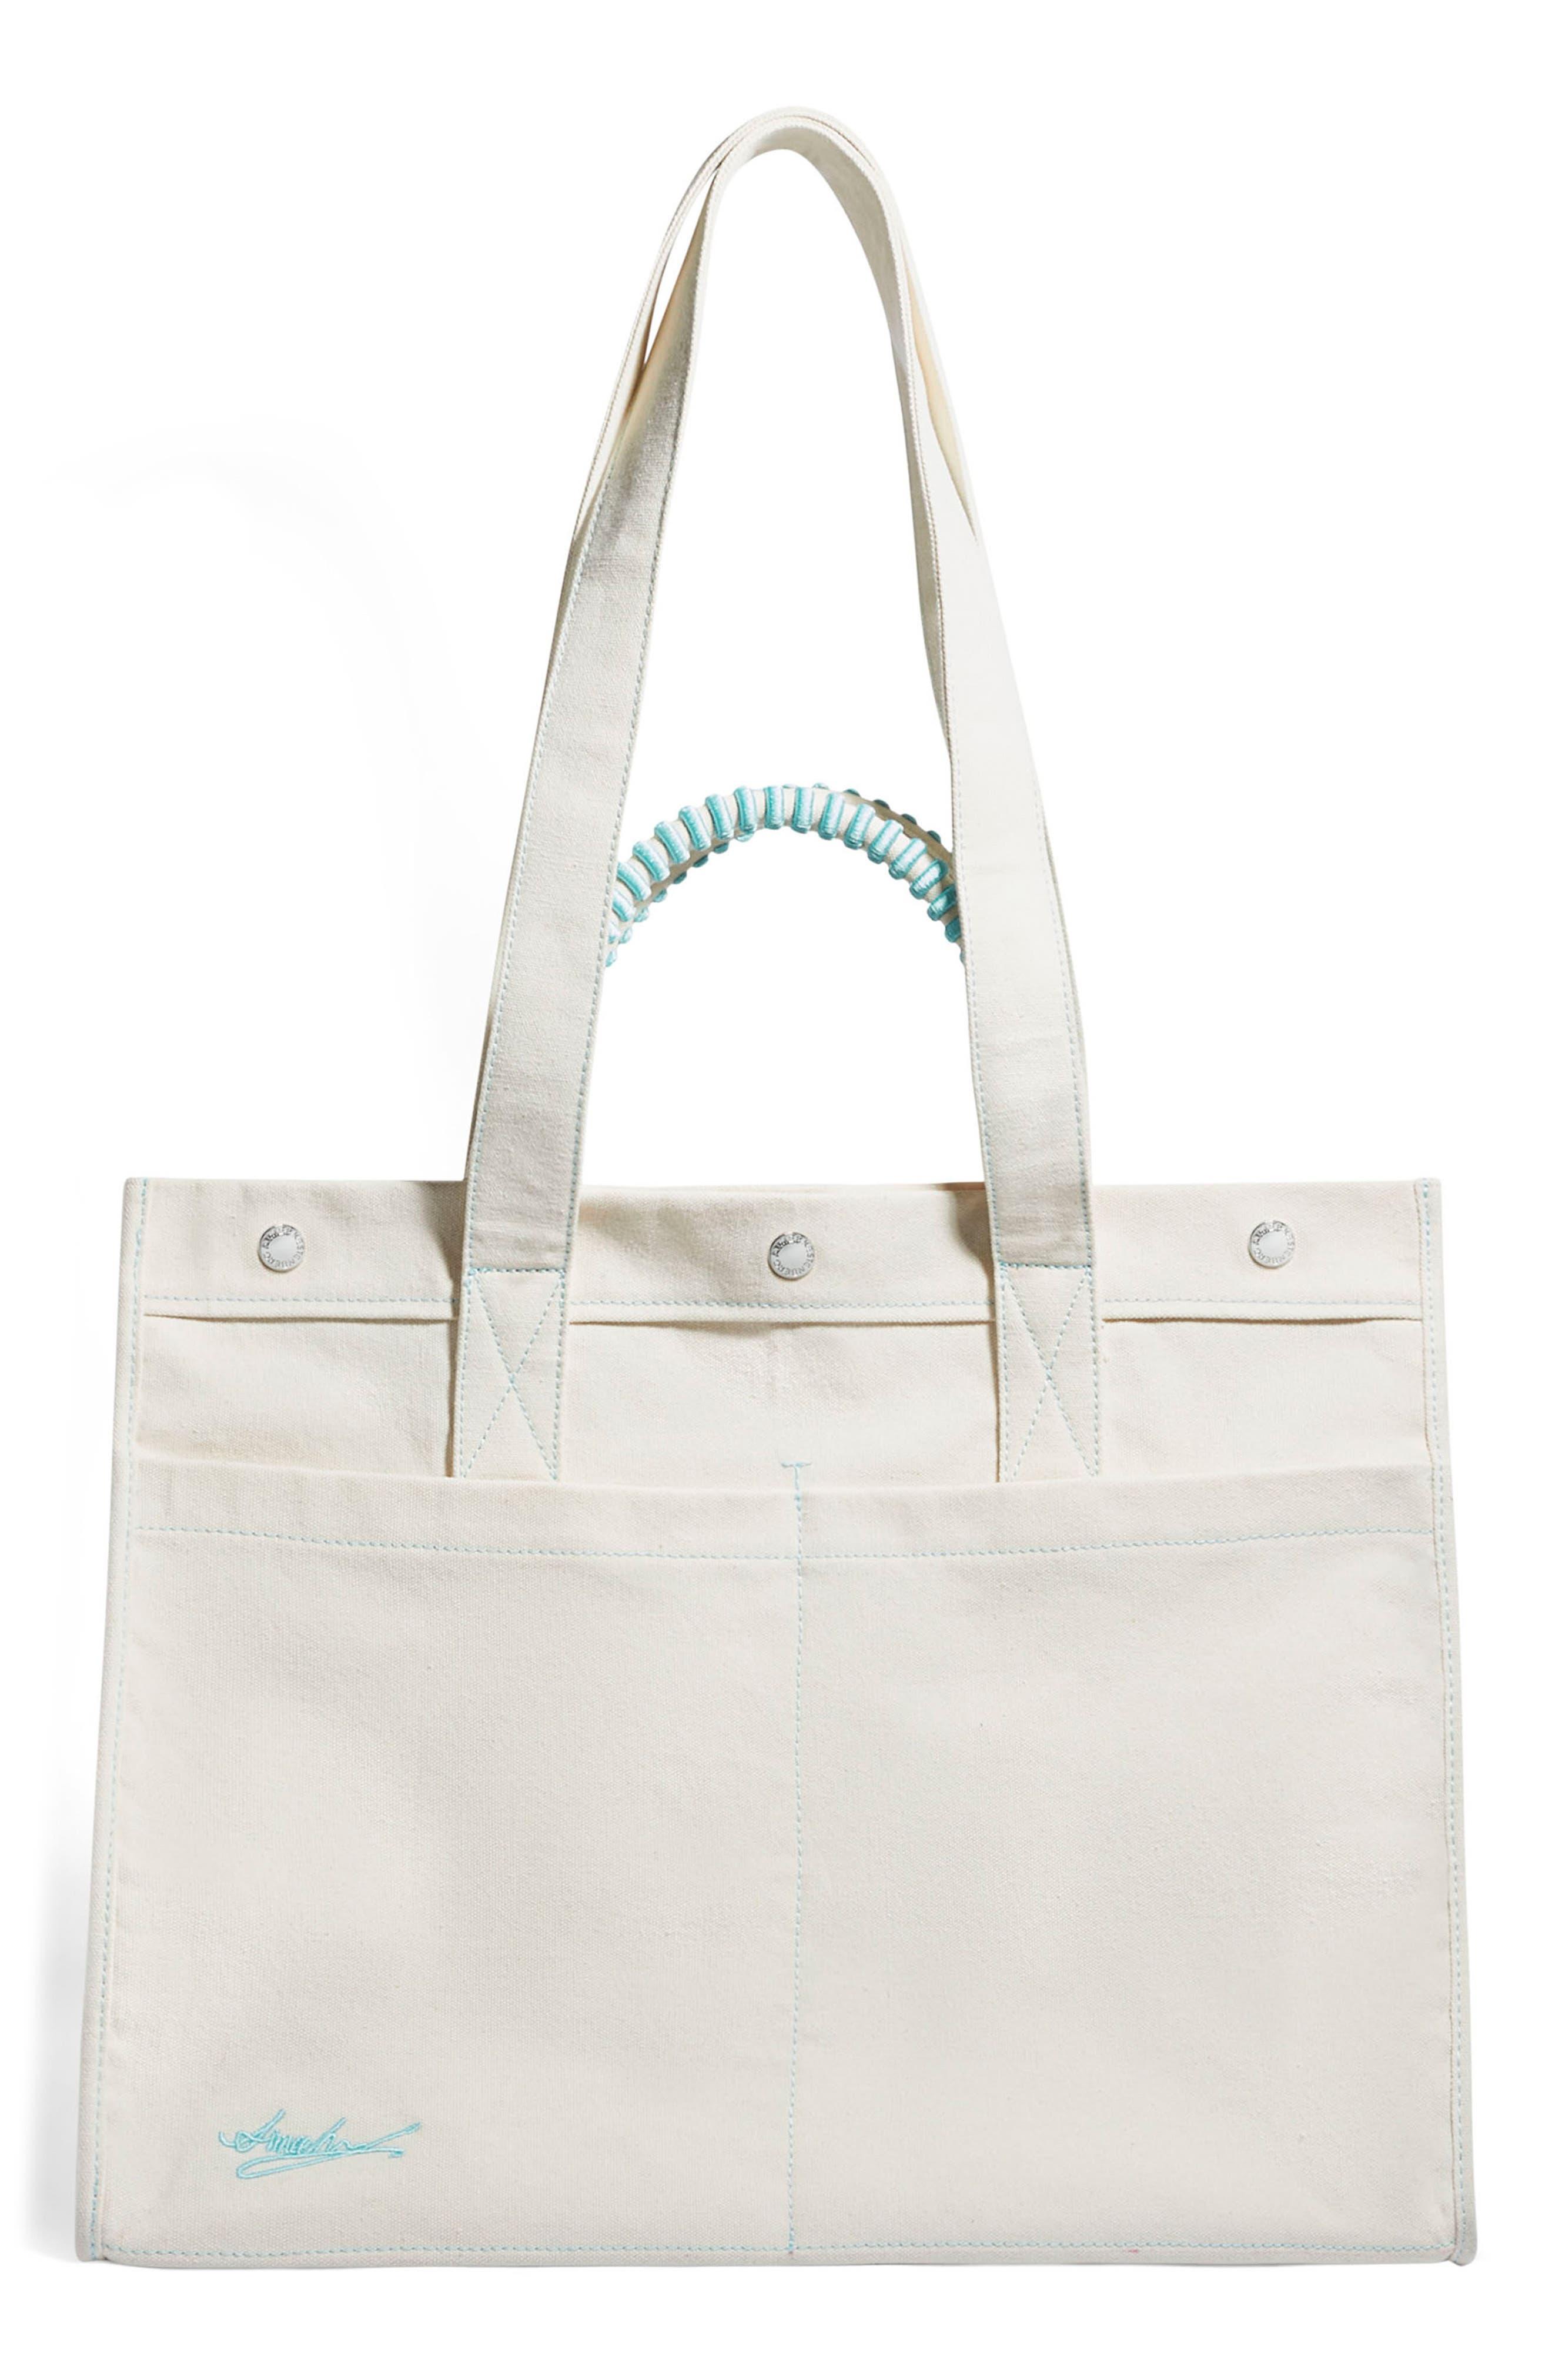 Aimee Kestenberg Jumbo You're My Everything Canvas Tote in Pink Peach